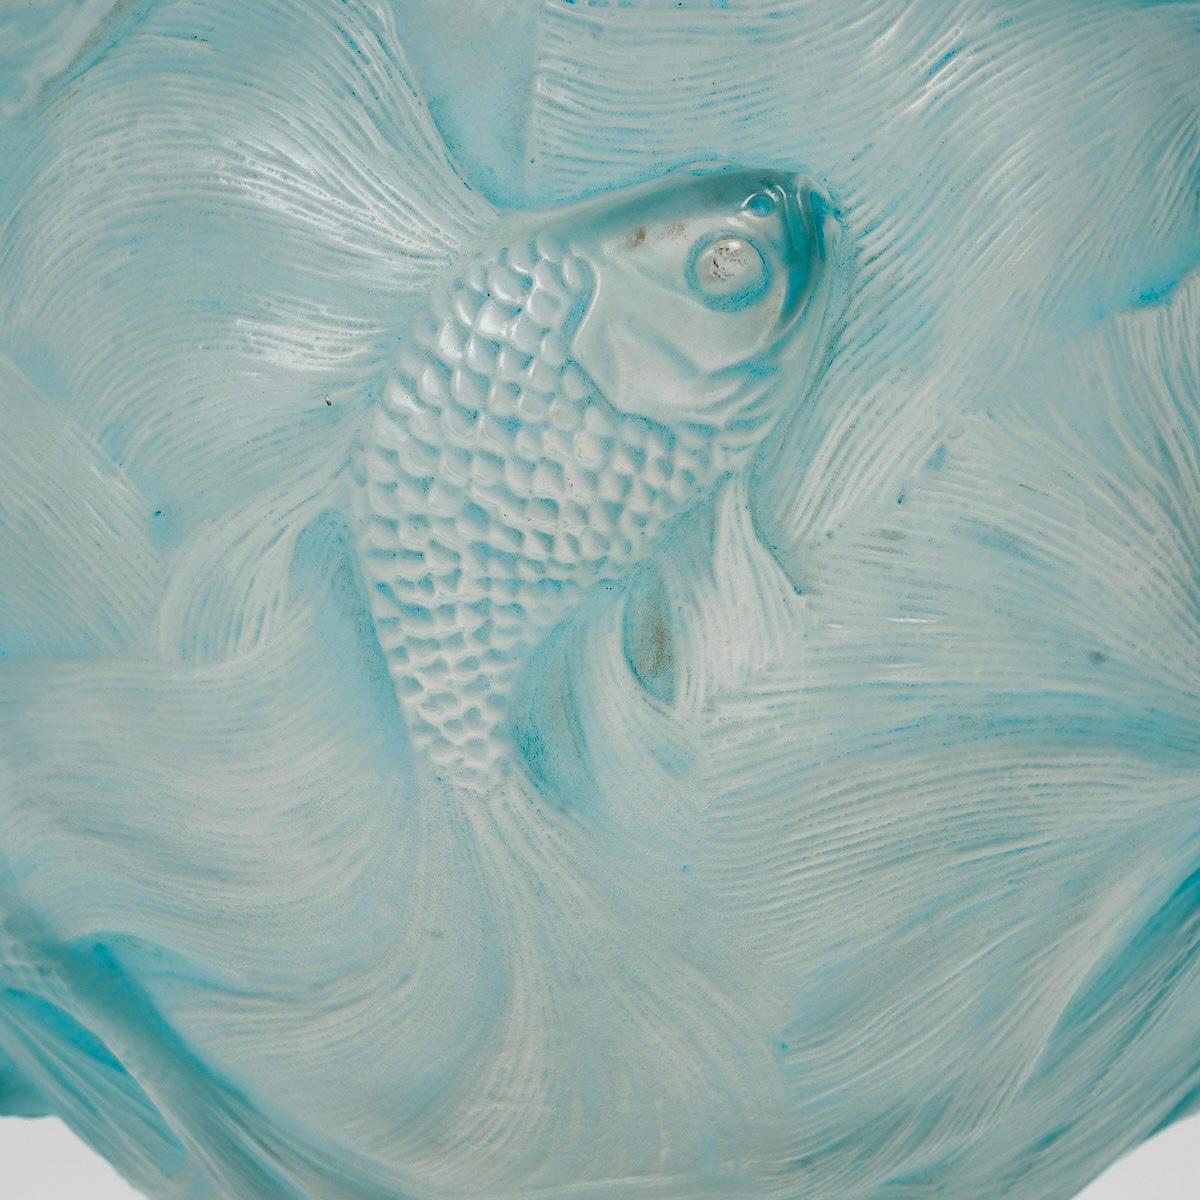 French 1924 René Lalique Vase Formose Frosted Glass Blue Patina, Fishes